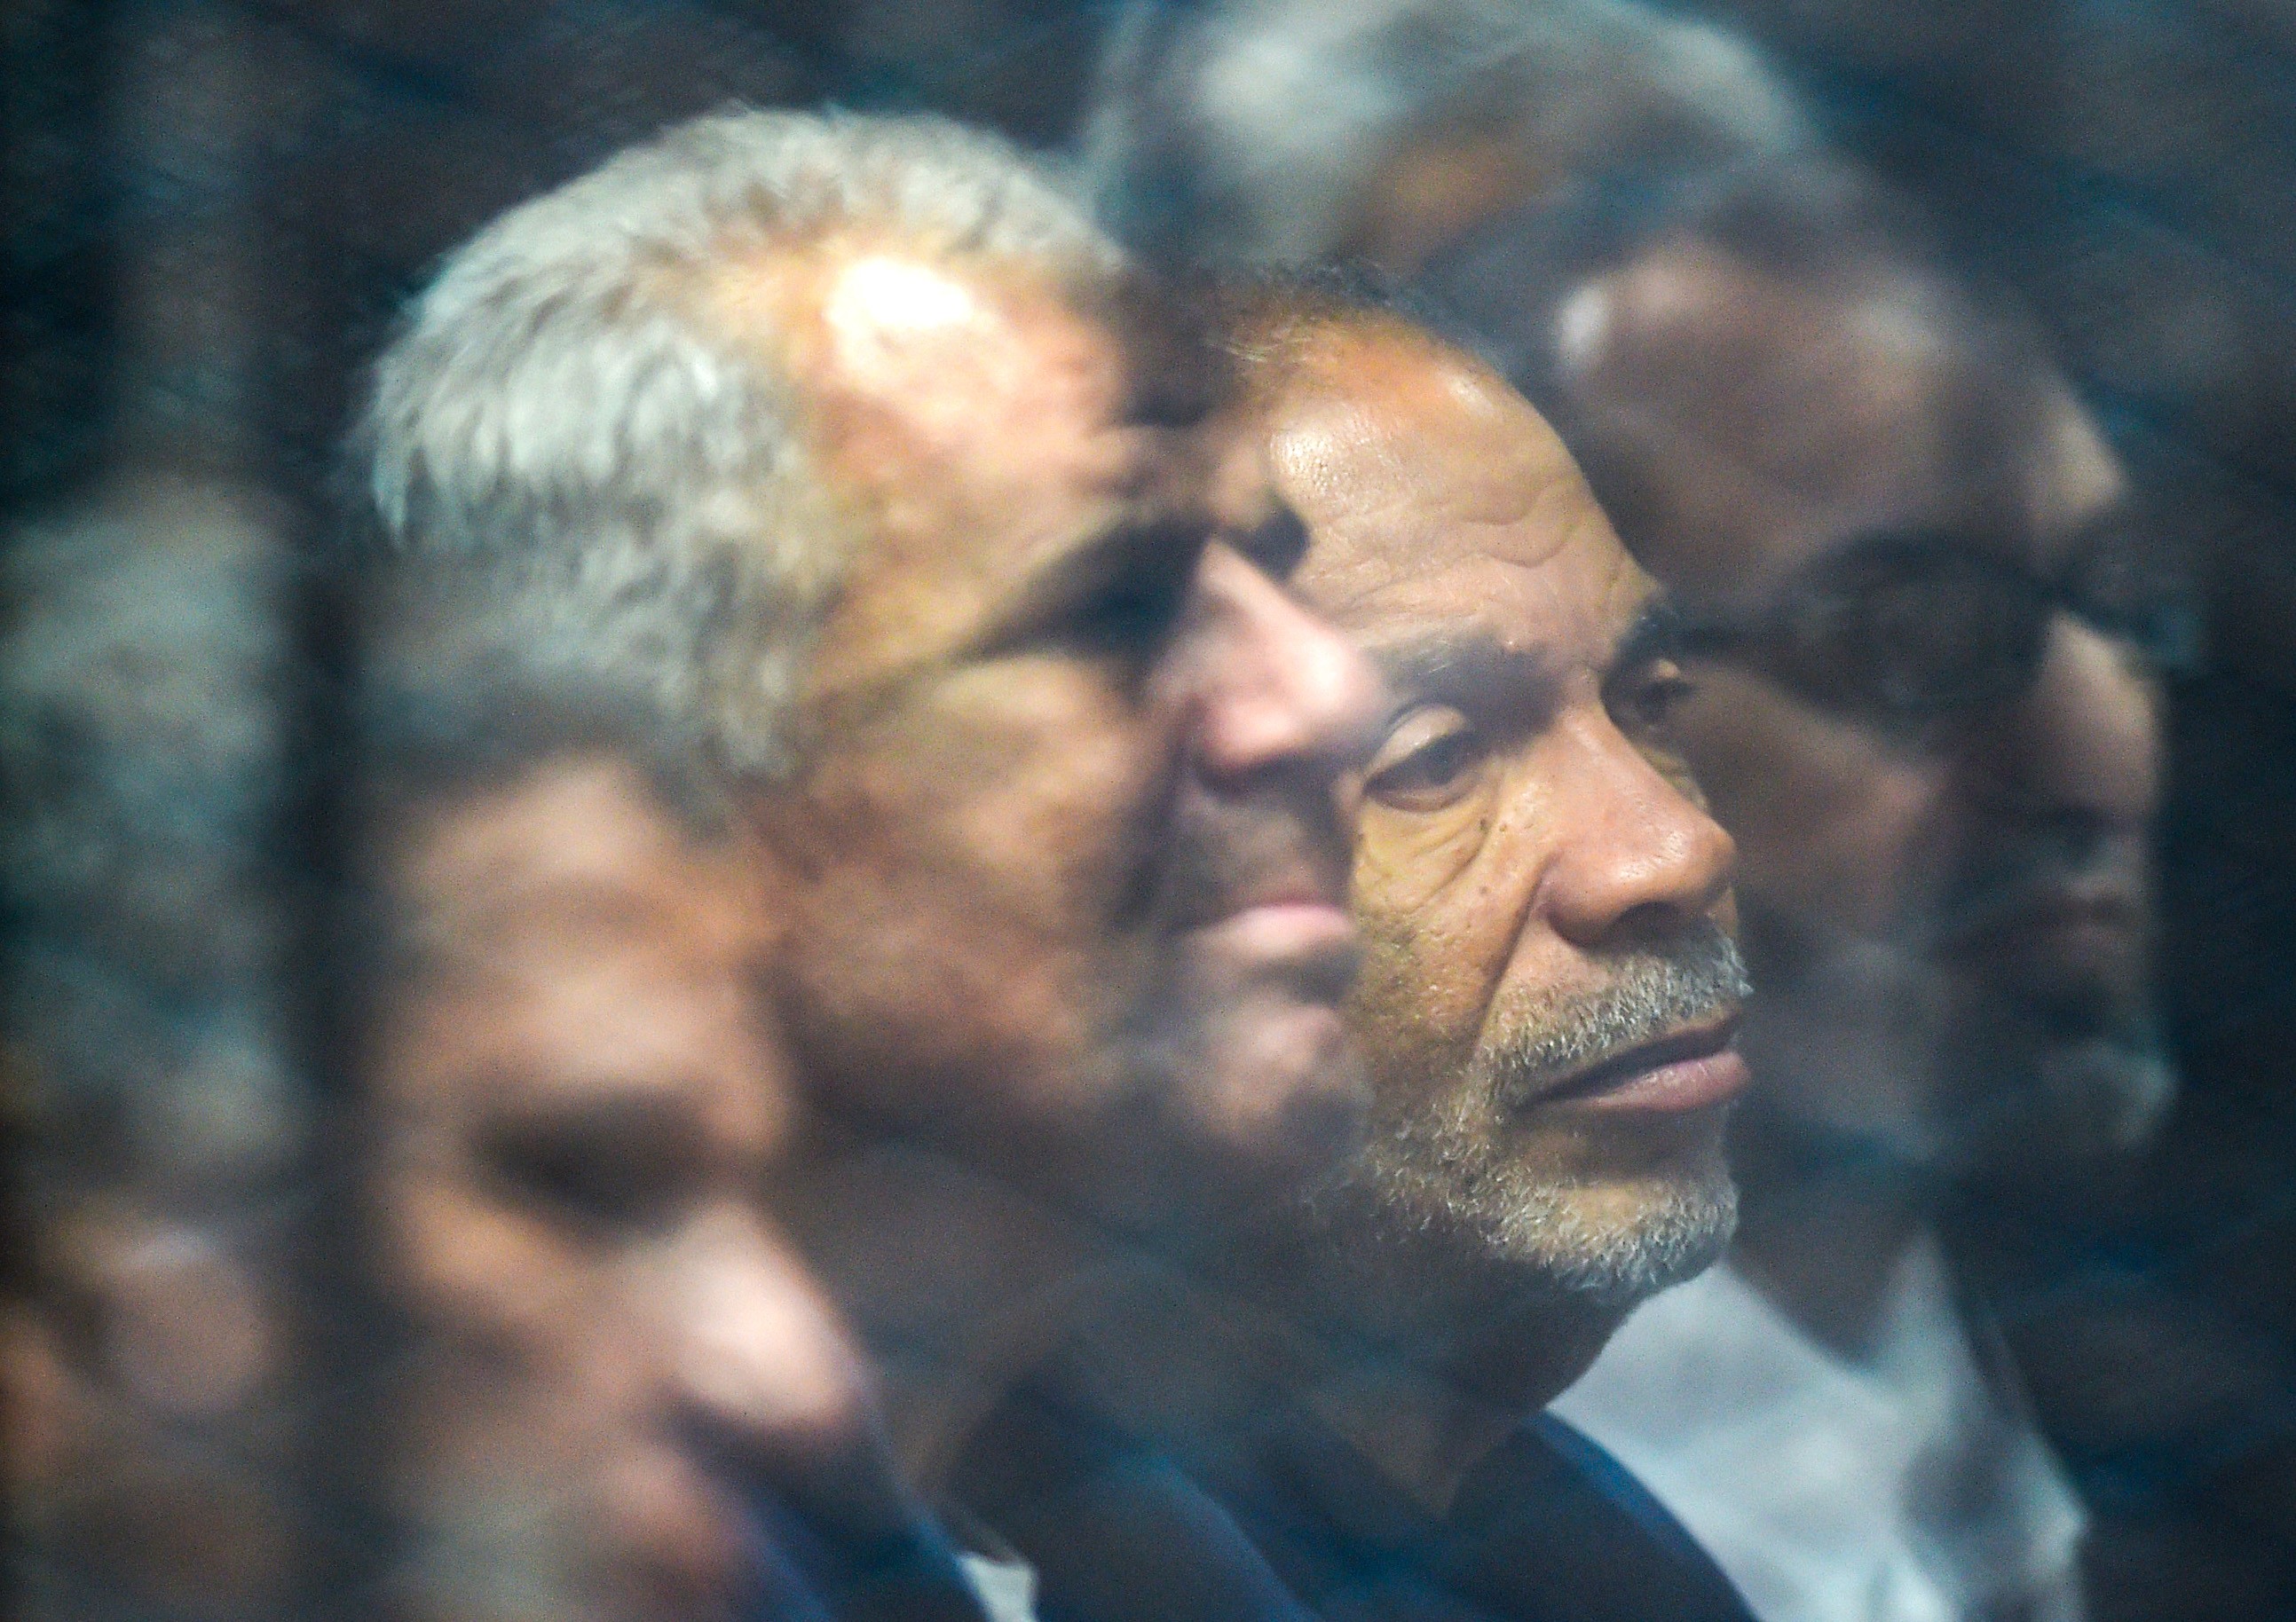 Senior Muslim Brotherhood member and former parliament speaker Saad al-Katatni (C-R) sits alongside fellow member Sobhy Saleh (C-L) behind bars in a glass cage during their trial over charges of breaking out of jail during the 2011 uprising against former president Hosni Mubarak's 29-year rule, at a make-shift courthouse in southern Cairo on December 2, 2018.